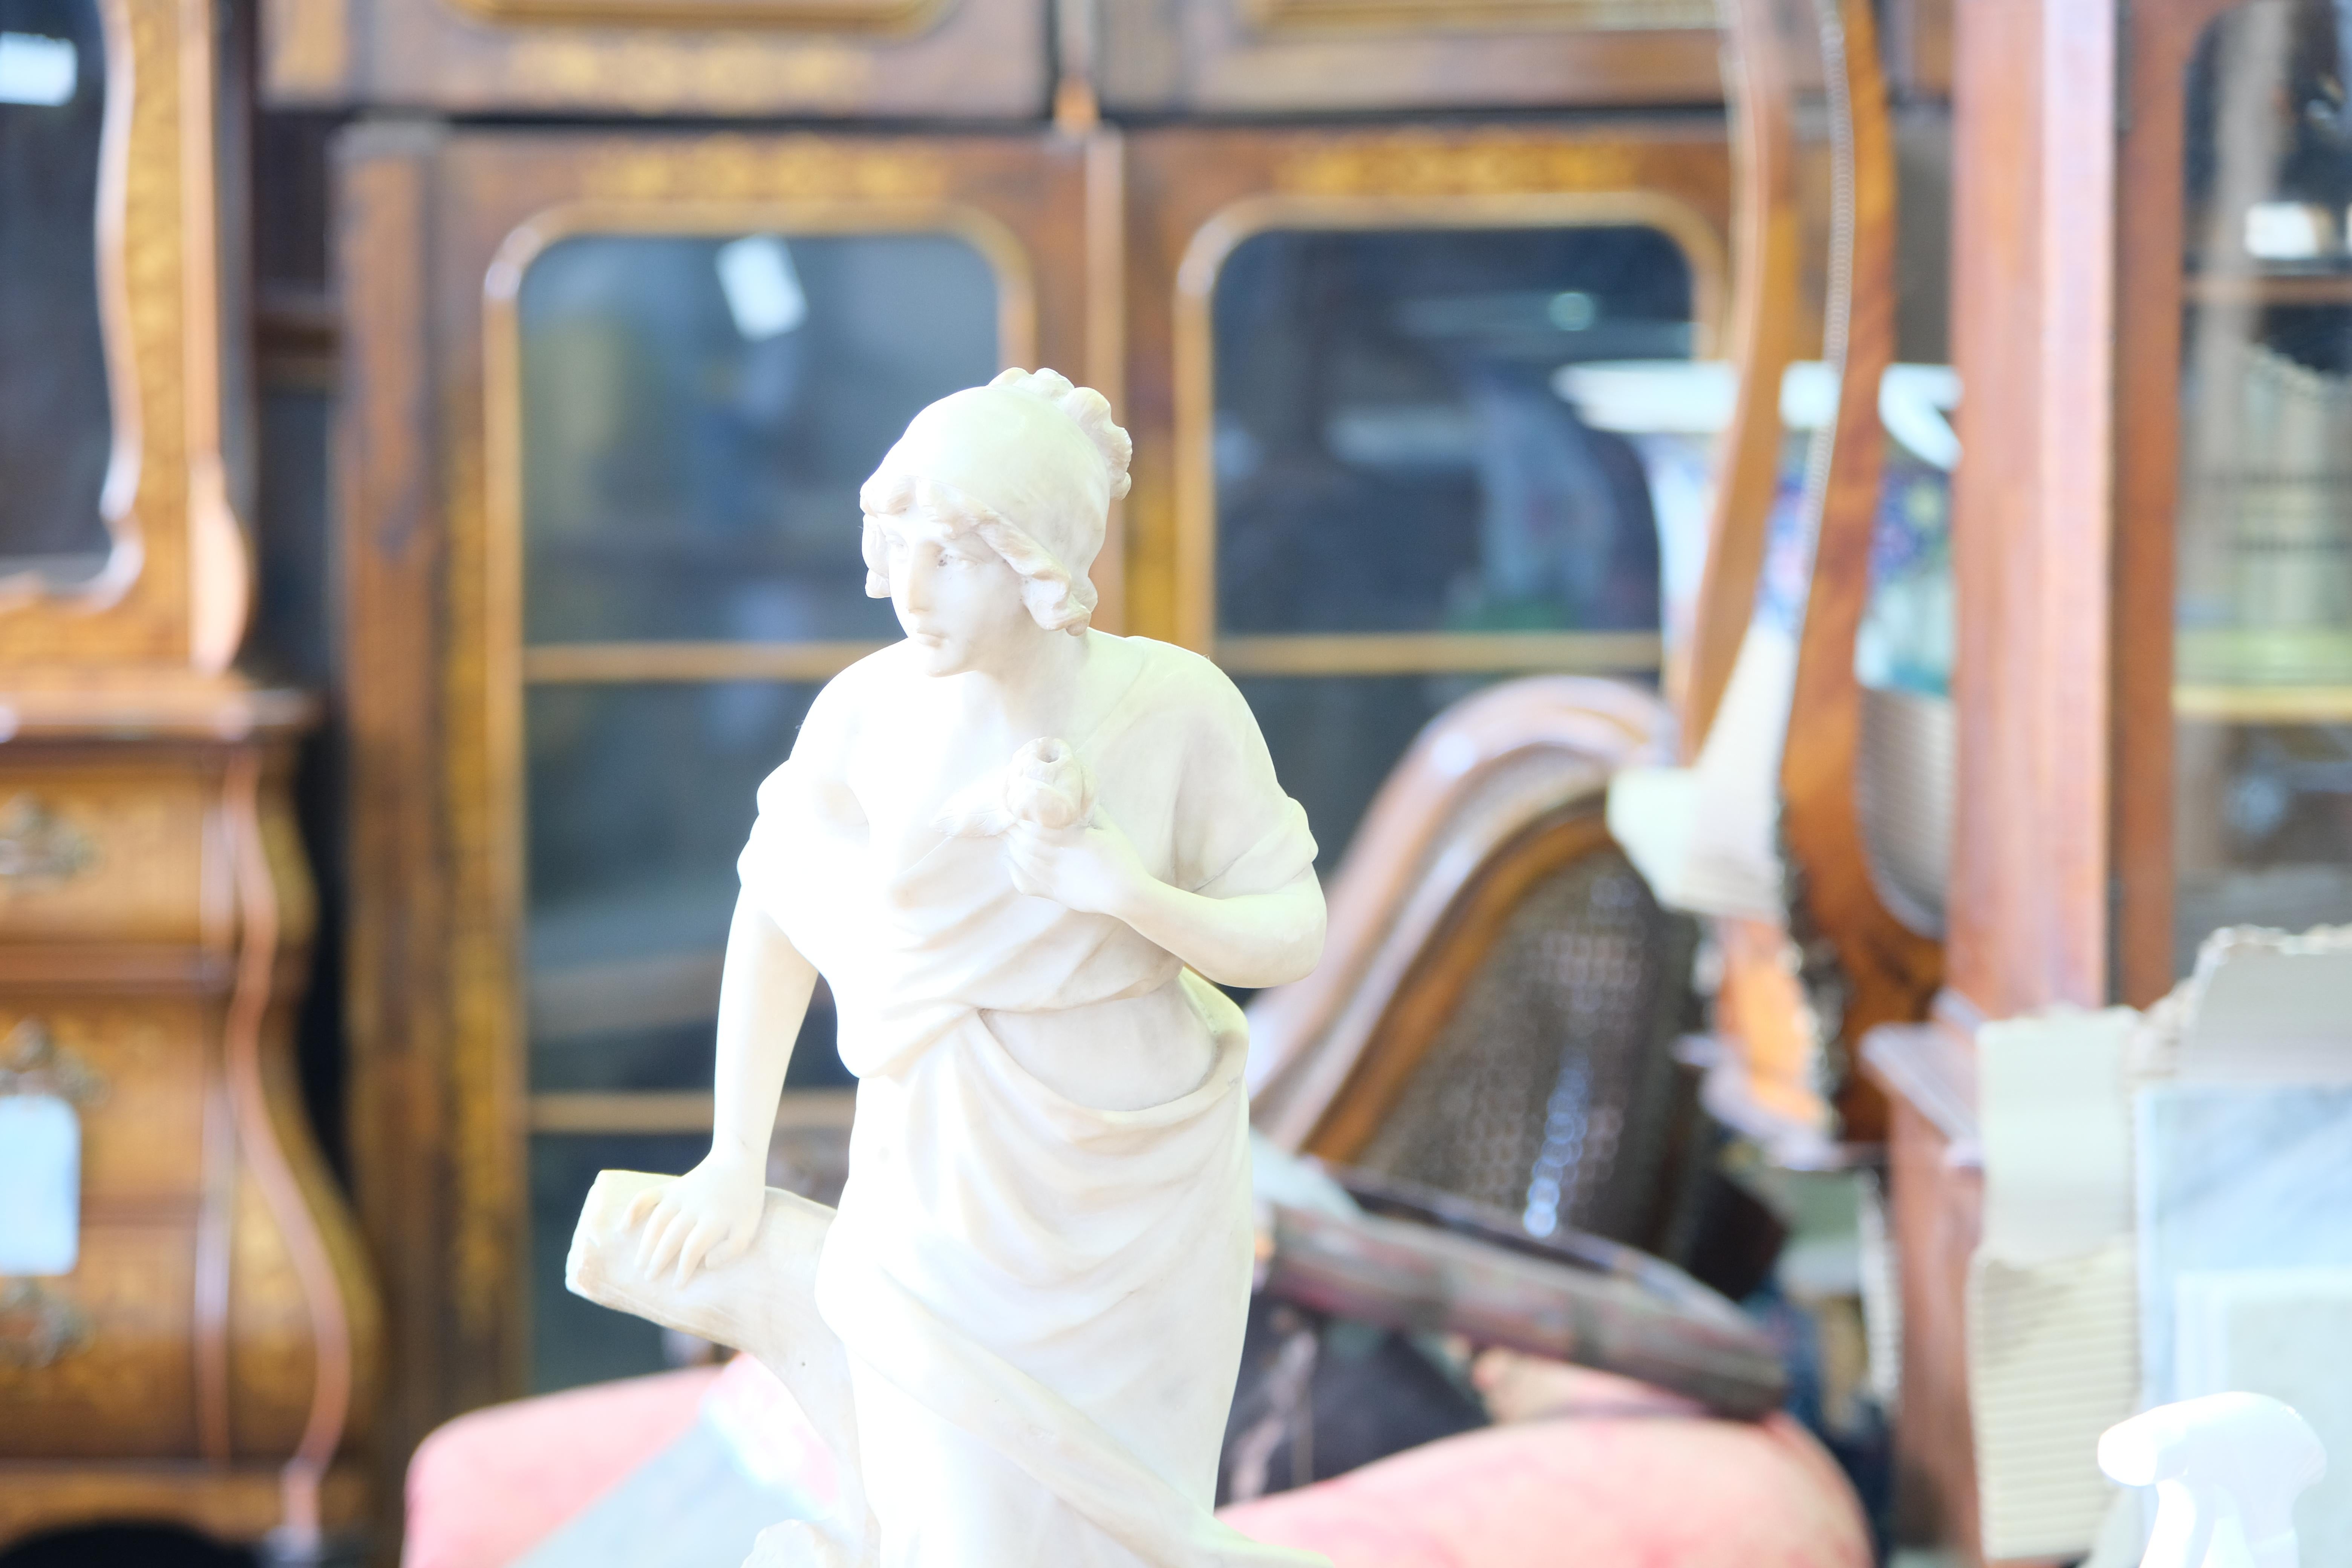 This delicately carved marble is a characteristic style of work of Mathurin Moreau, a leading French sculptor who specialised in the representation of nymphs and female allegories. This replica is in superb condition, and perfect for home design and